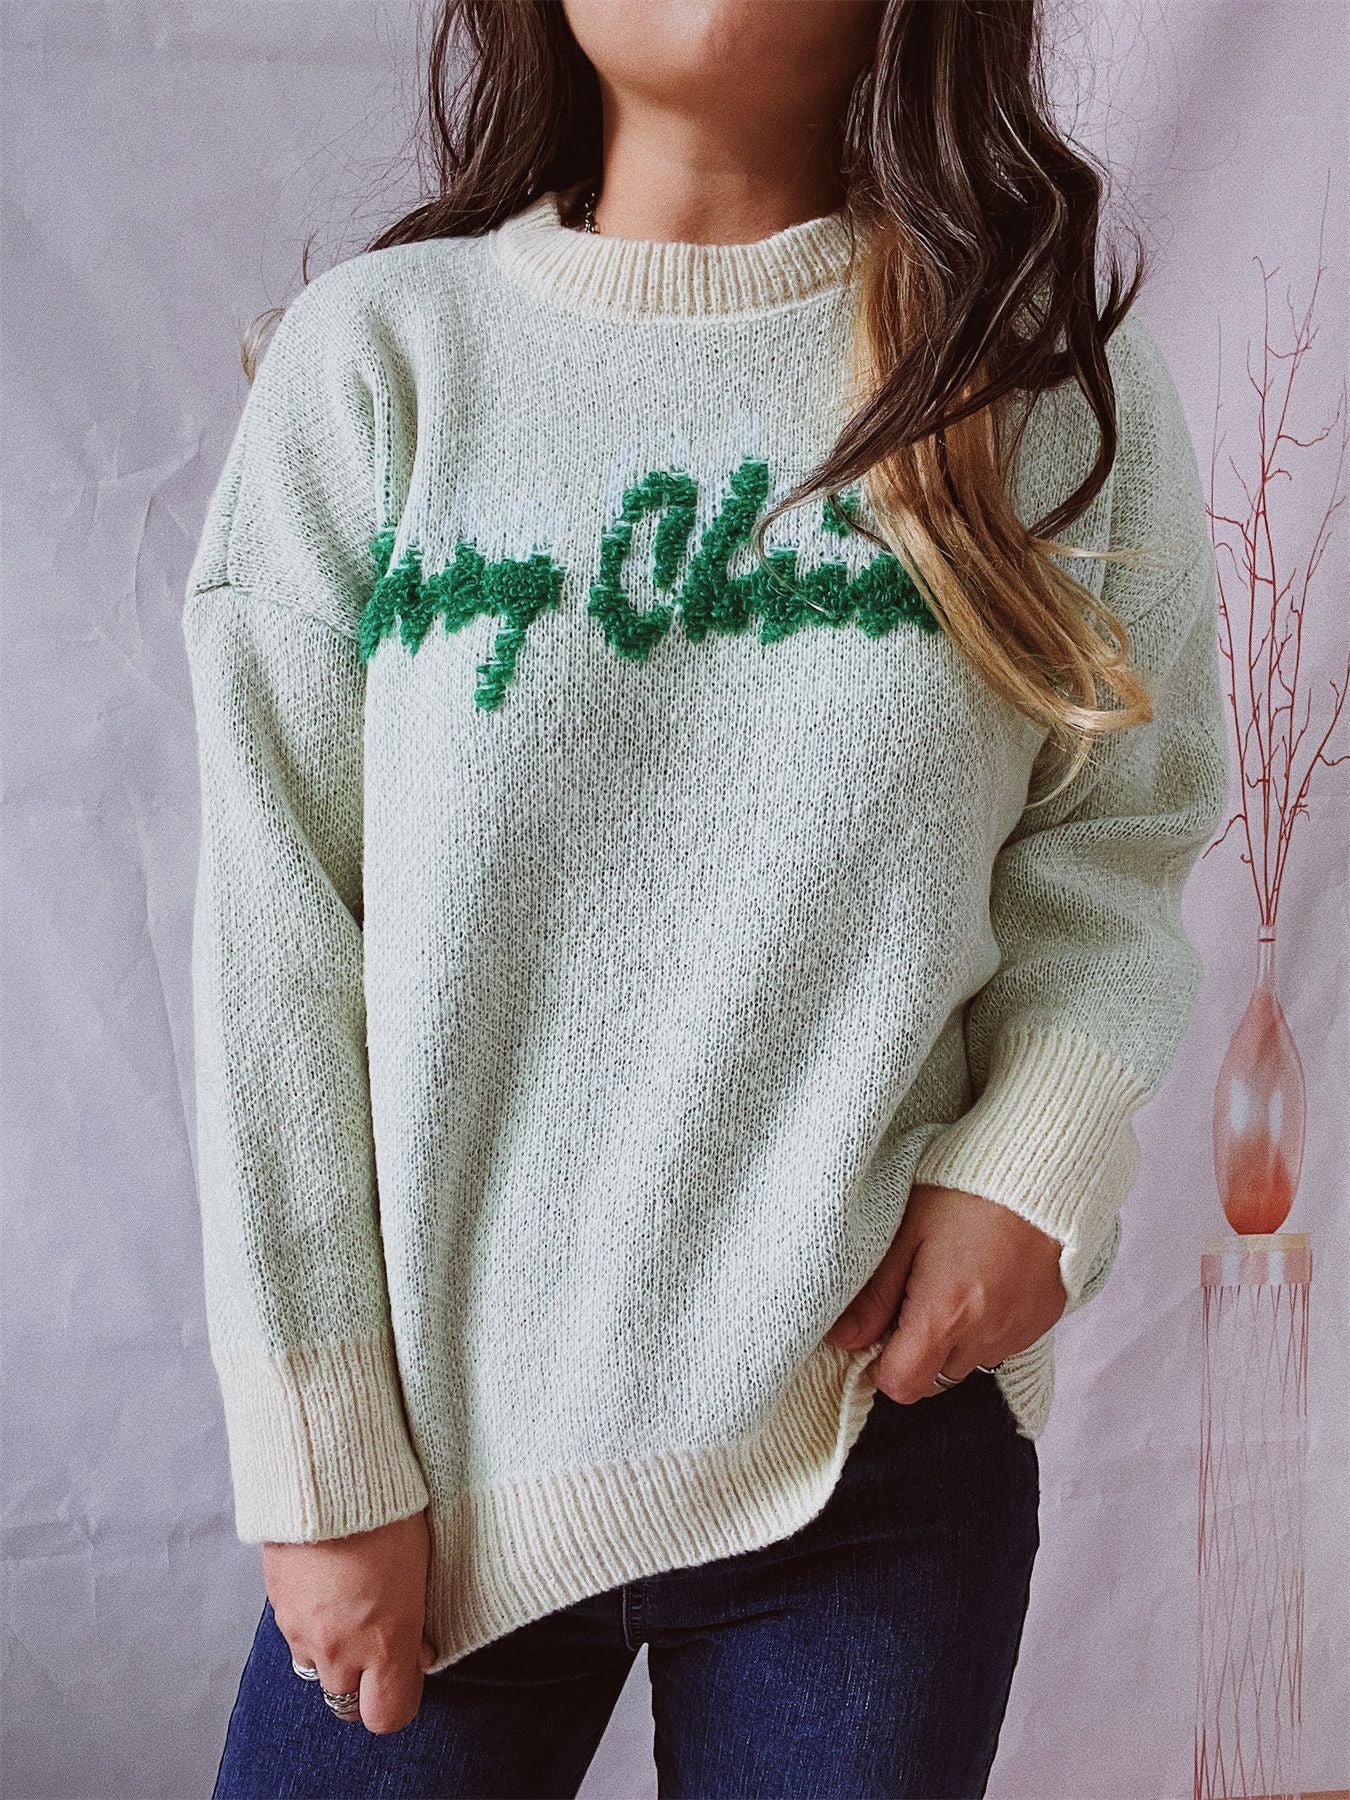 Women's Fashion Round Neck Long Sleeve Letter Brocade Sweater